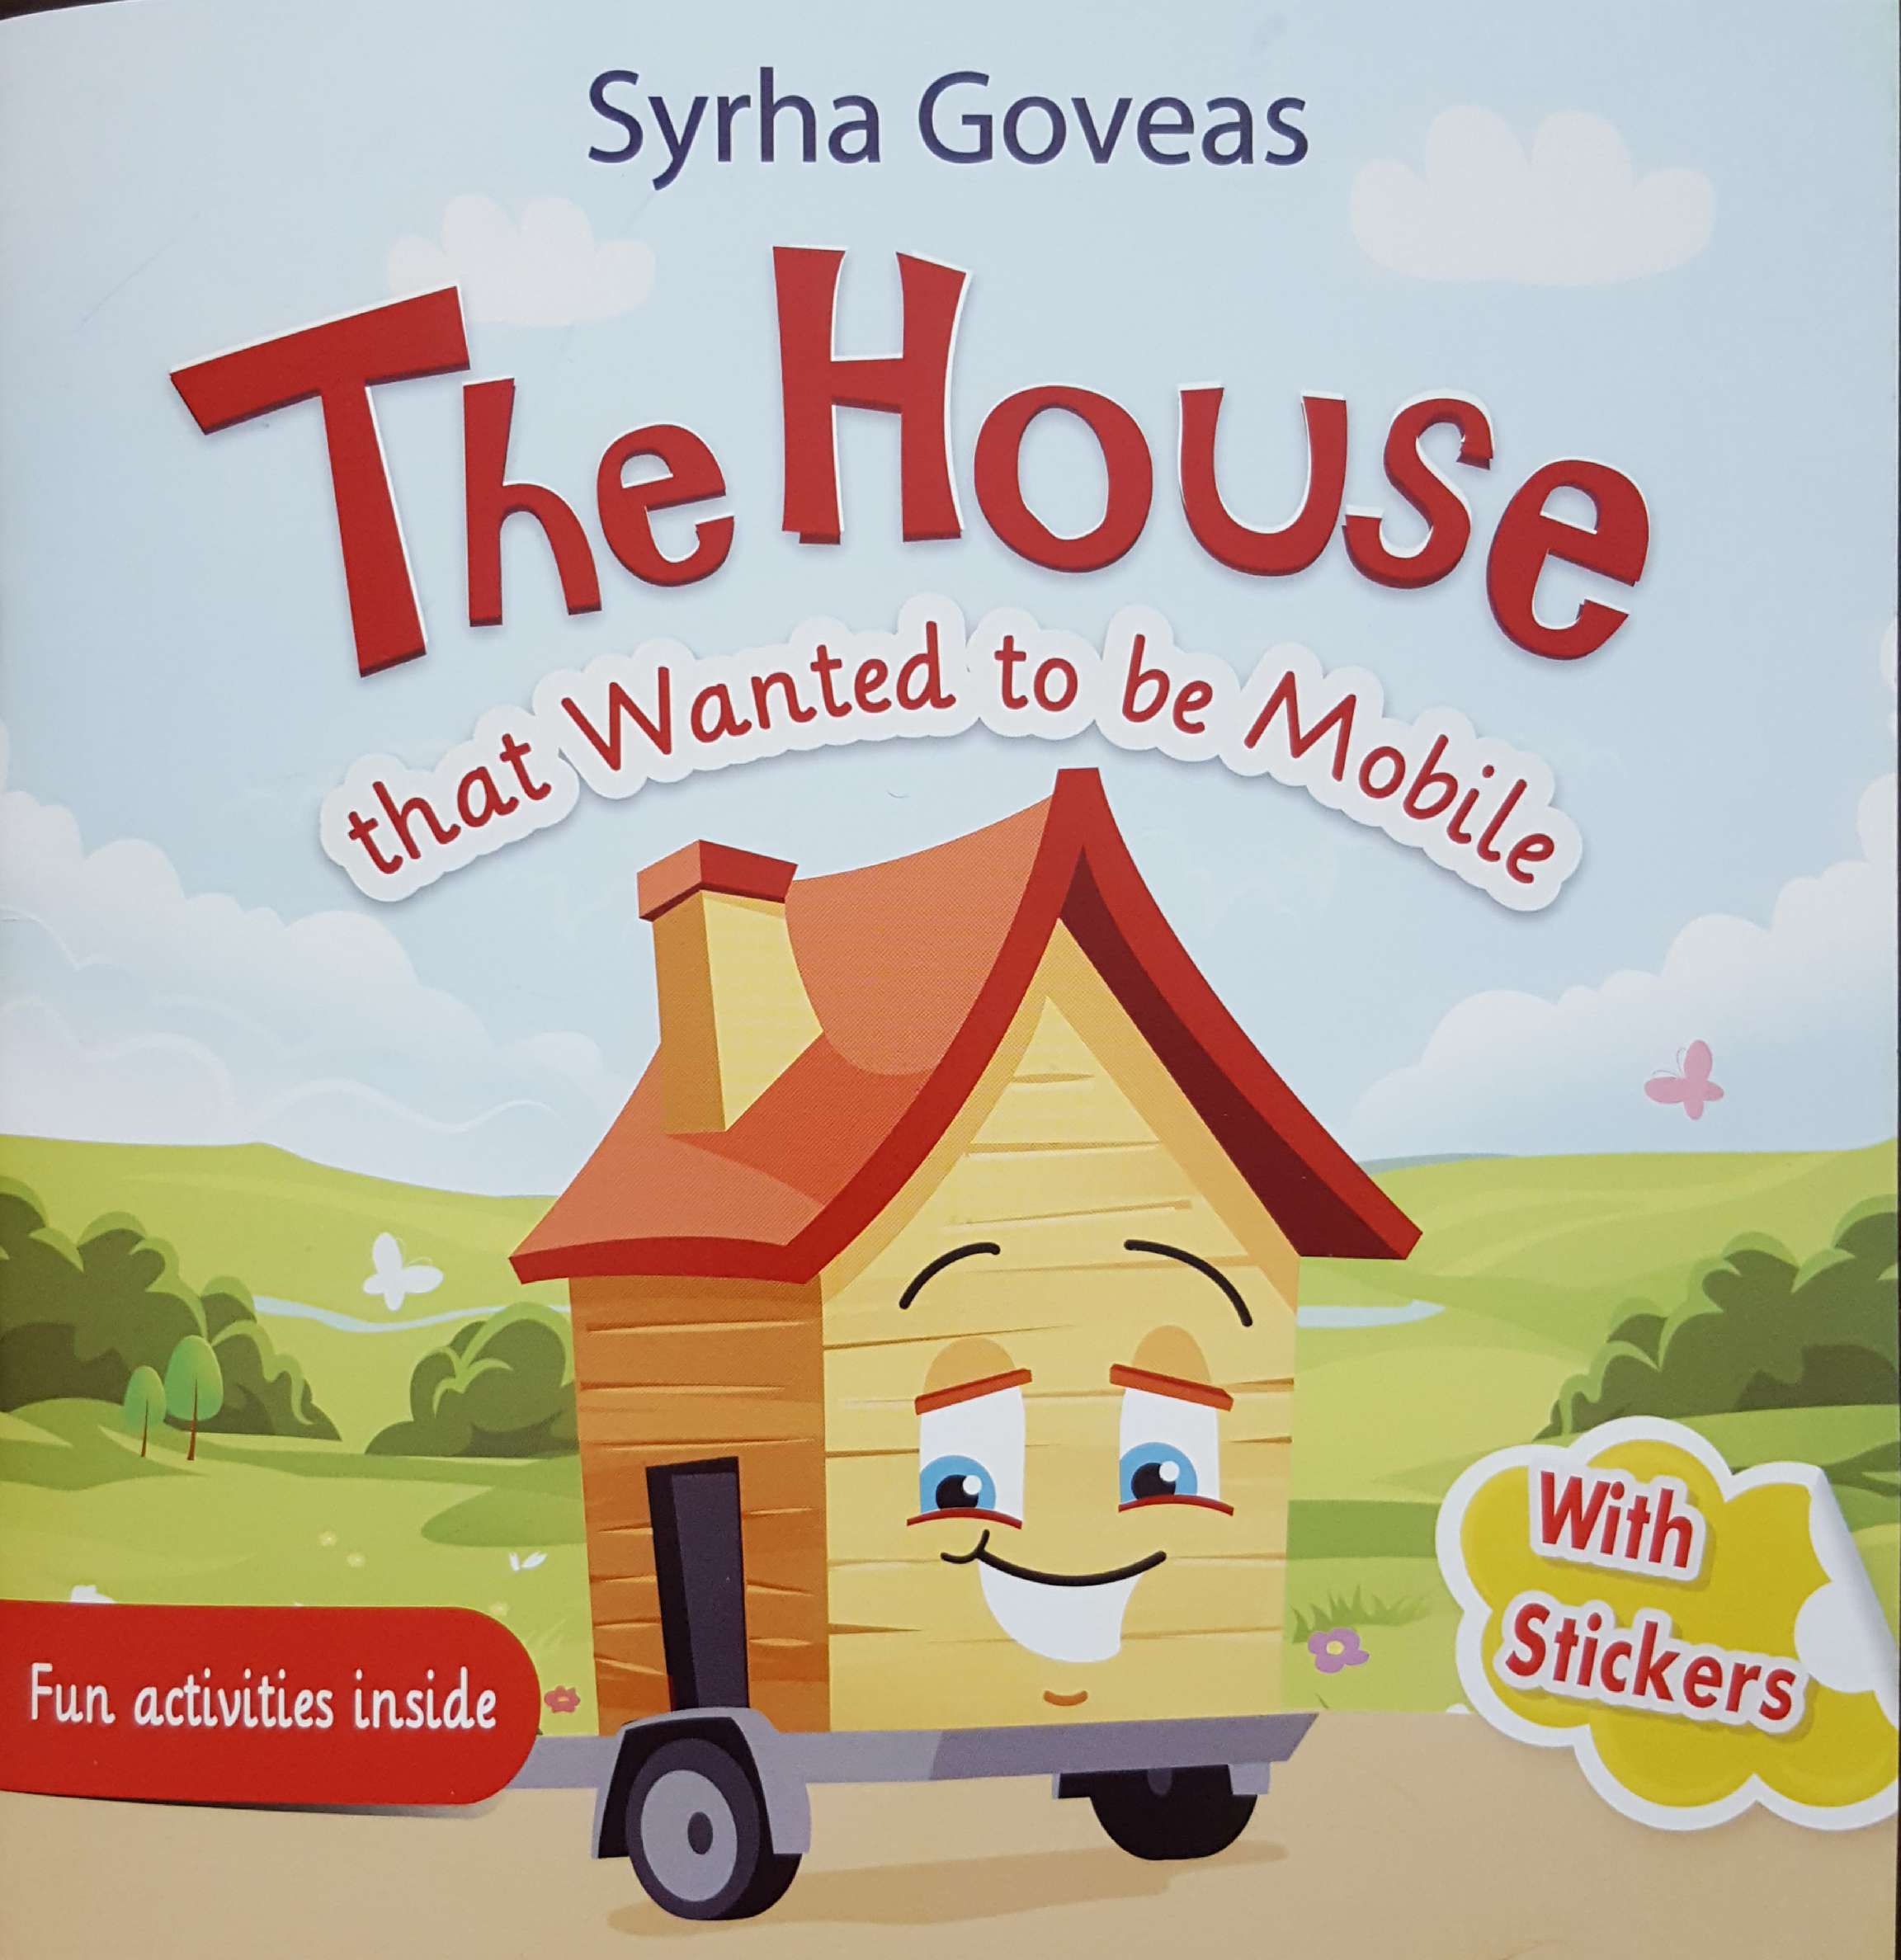 The House: that wanted to be Mobile (with stickers) Fun activities inside By Syrha Goveas